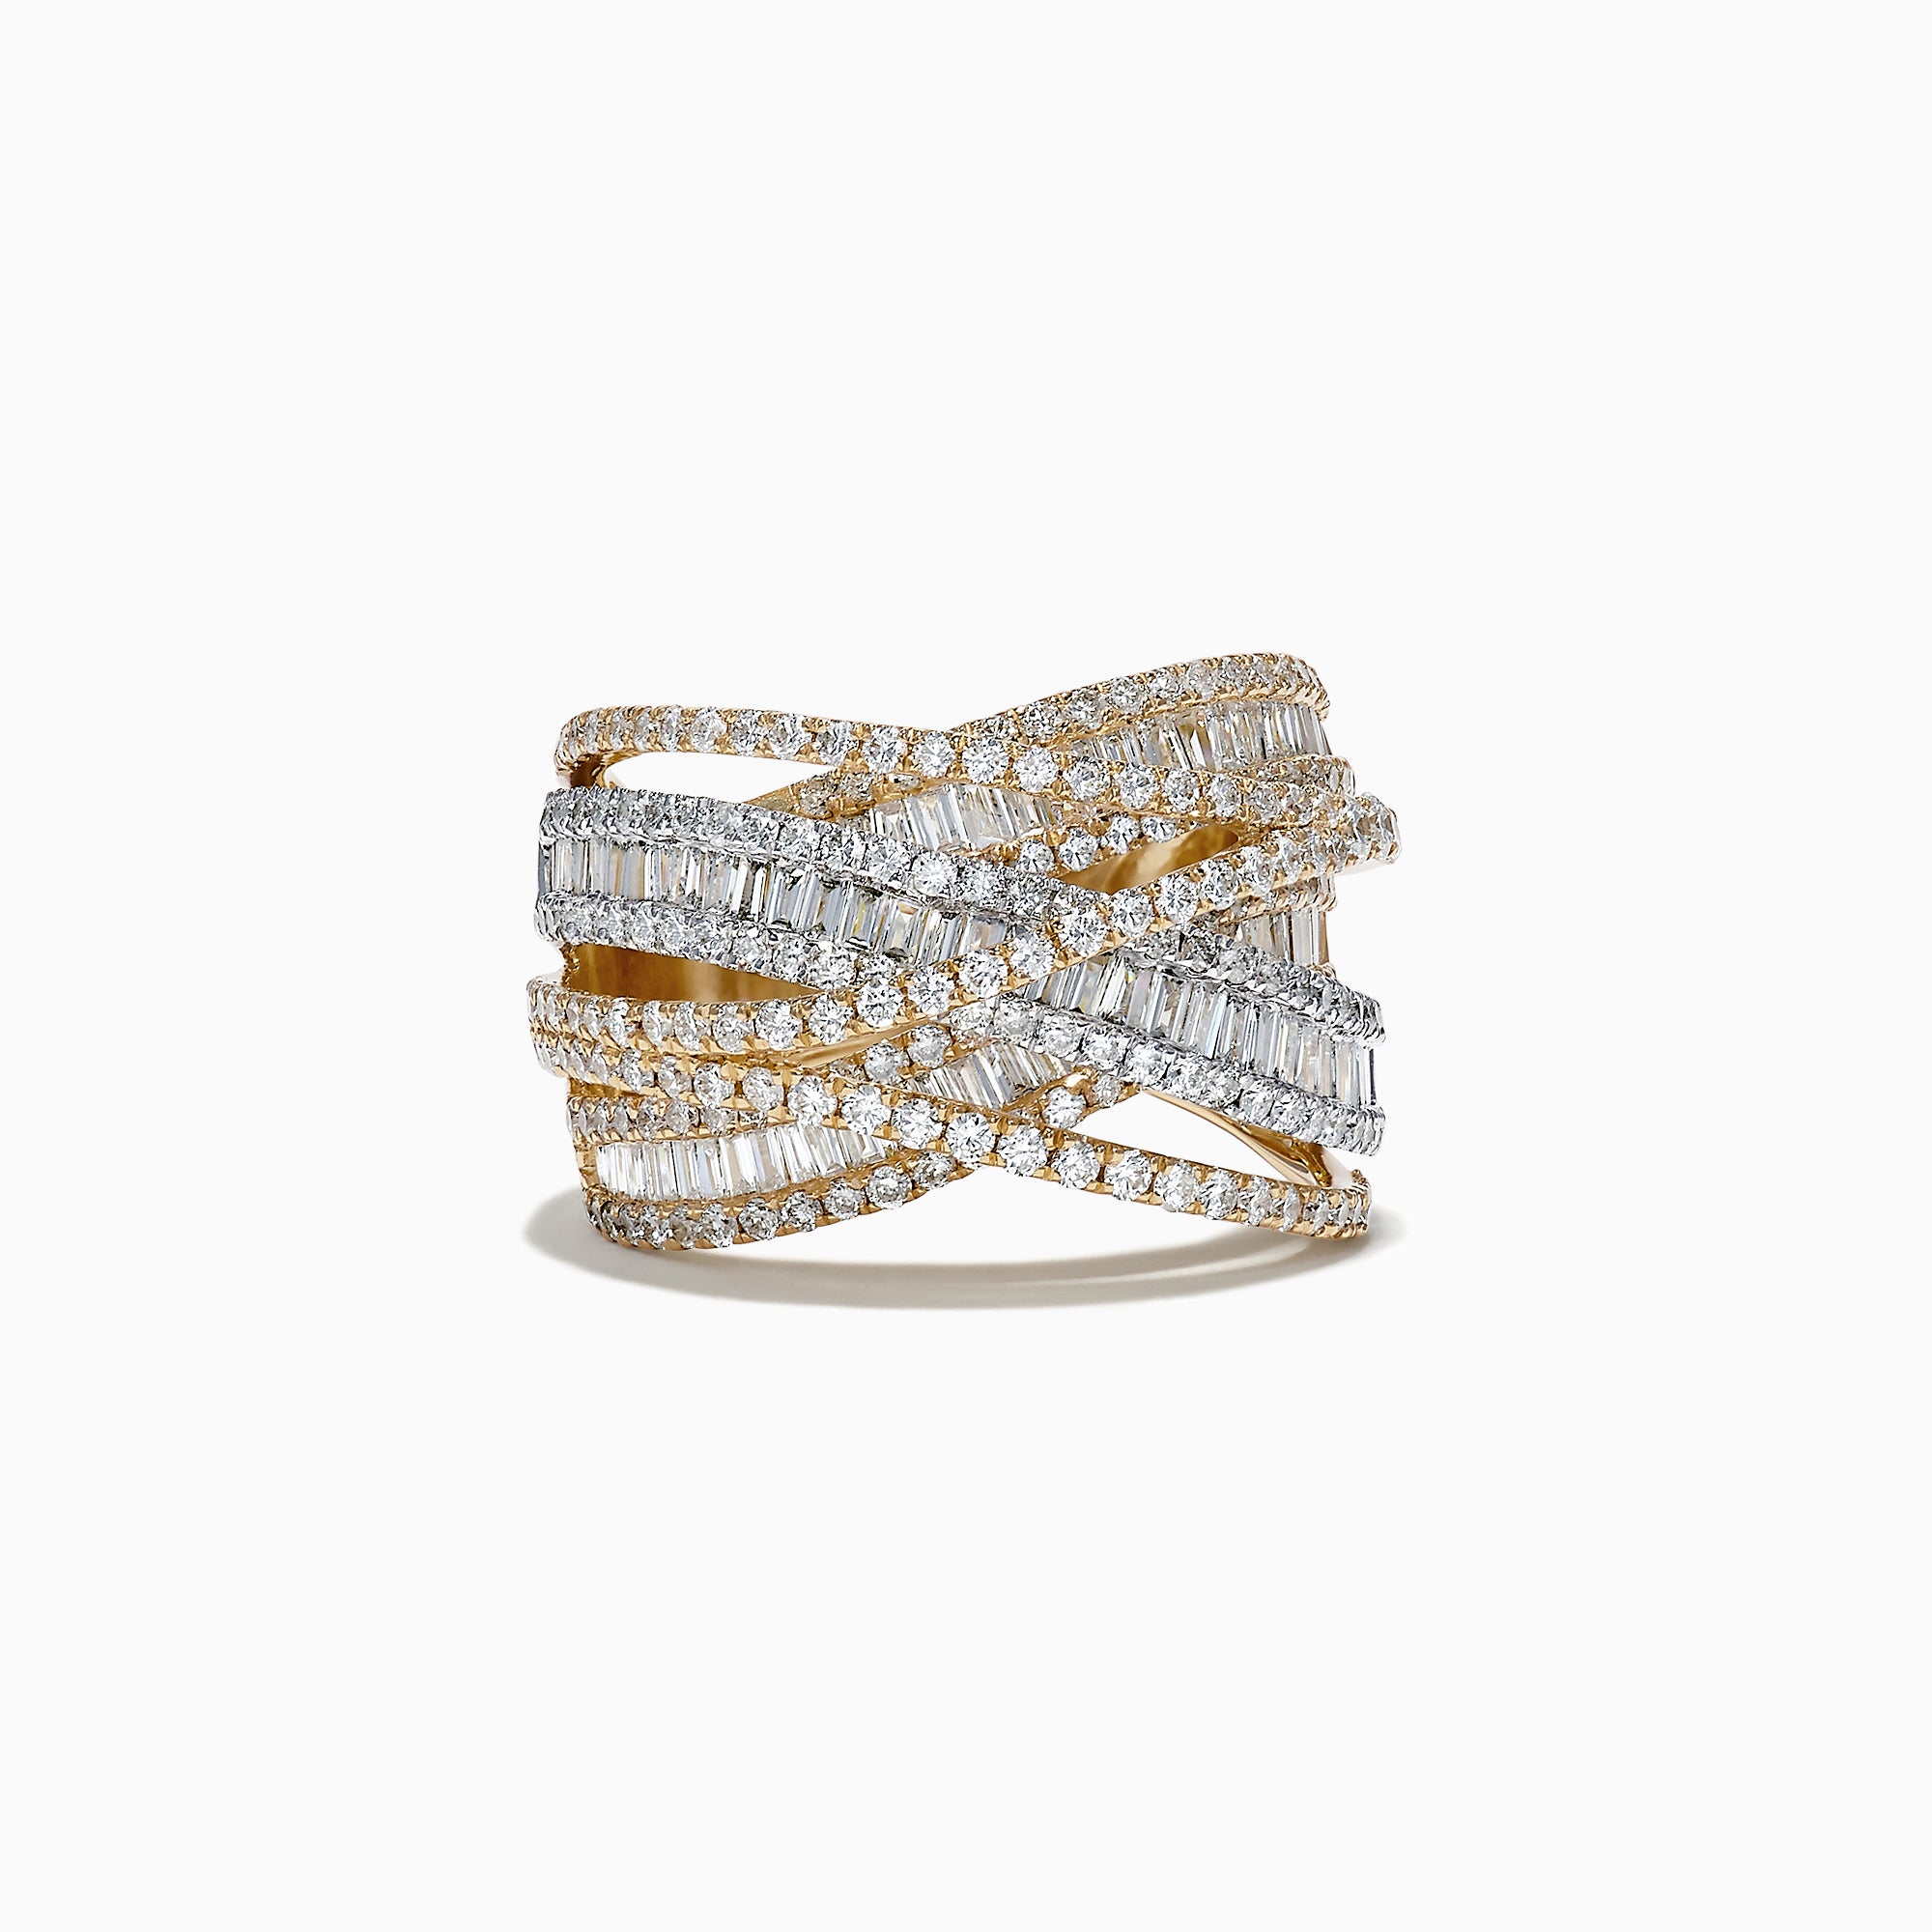 Effy Duo 14K White and Yellow Gold Diamond Crossover Ring, 2.75 TCW